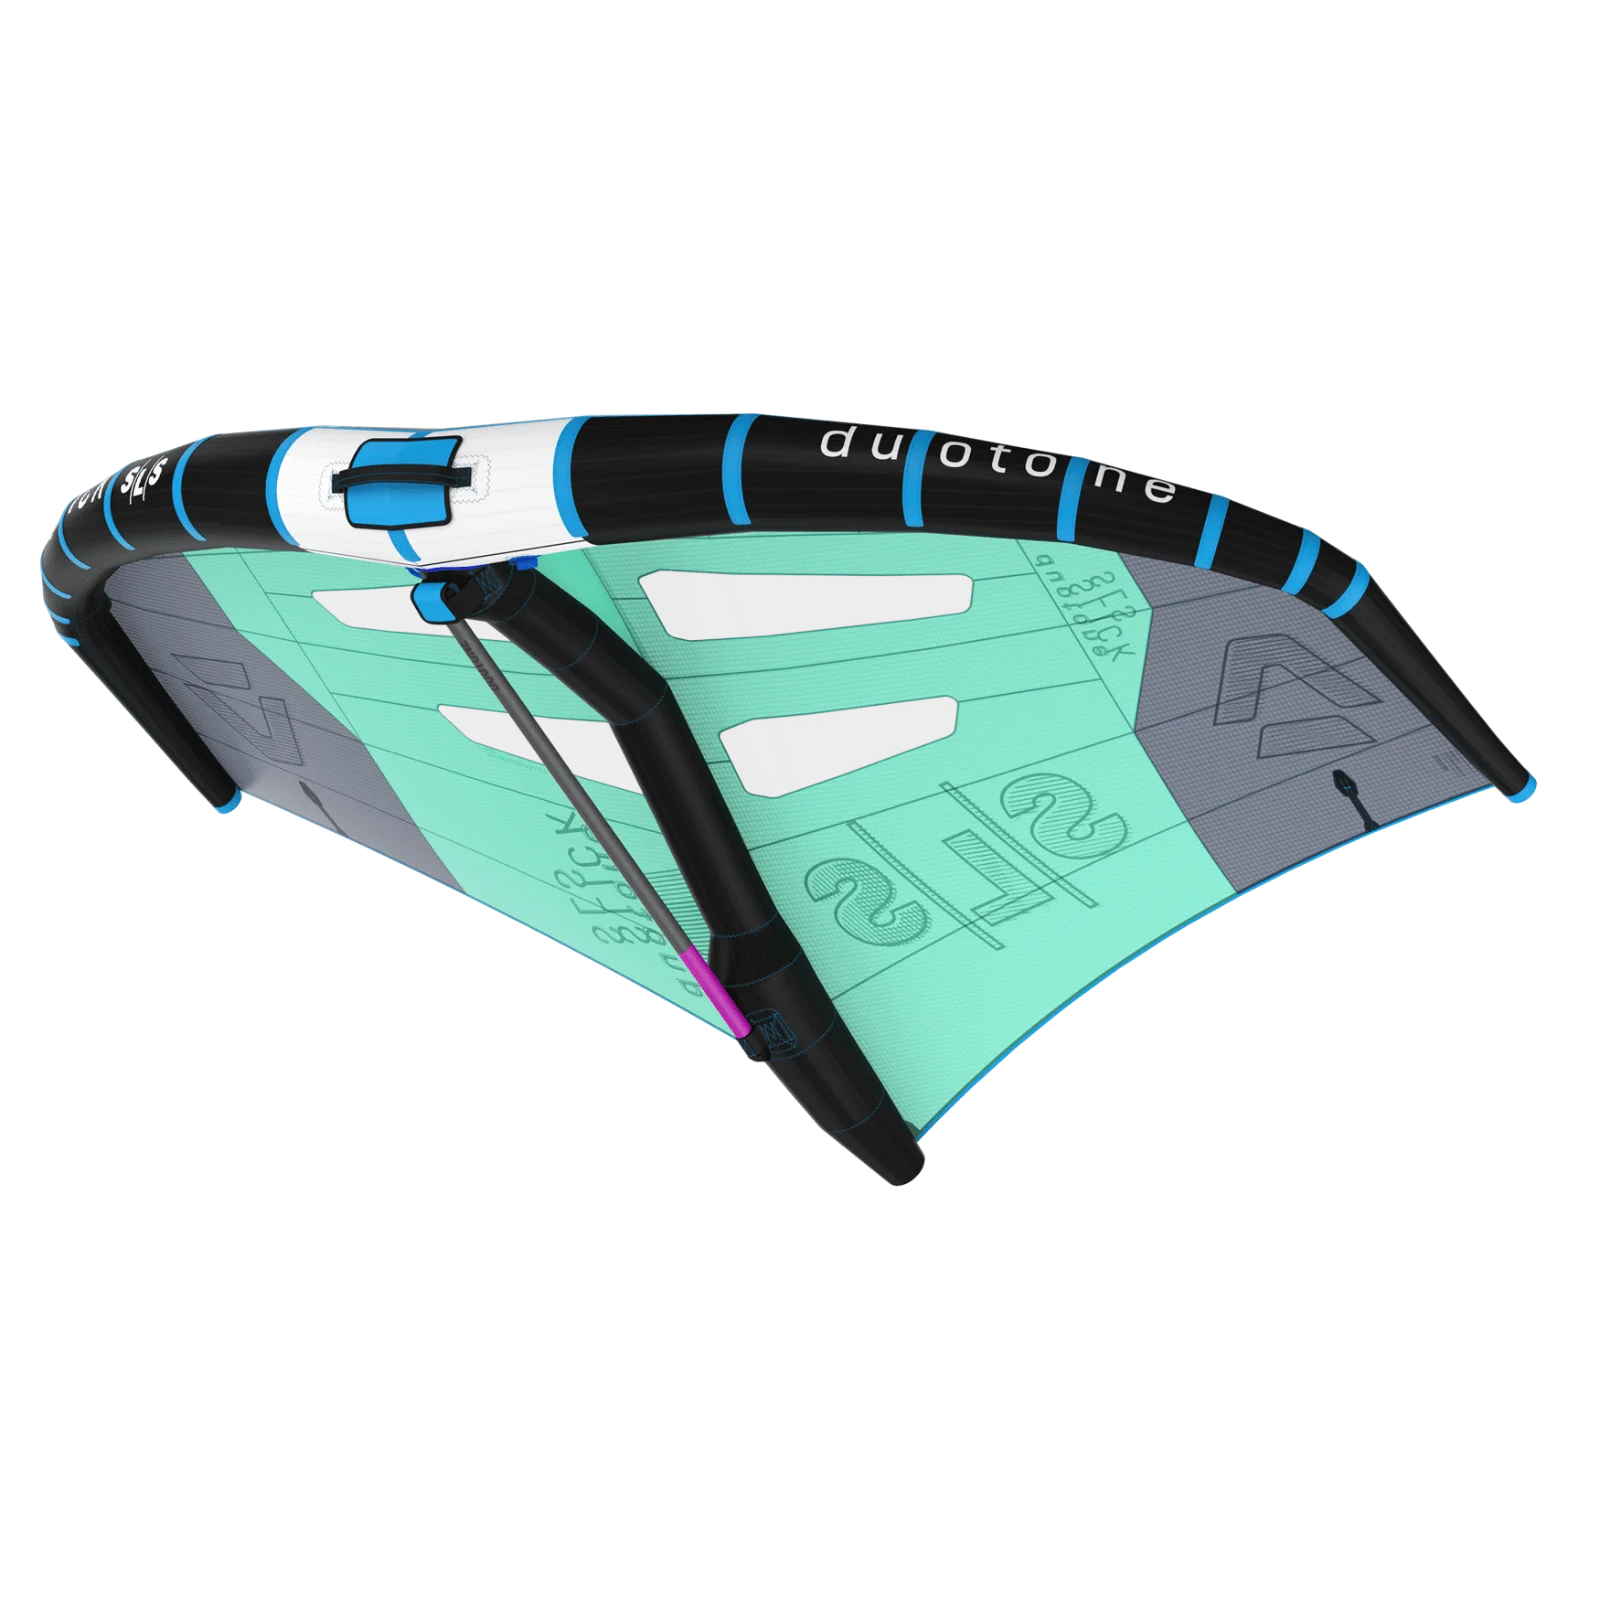 Duotone Wing Slick SLS FREERIDE - FREESTYLE Foilwing - Surfwing - WAVE & DOWNWIND (Modell 2022 / 2023)